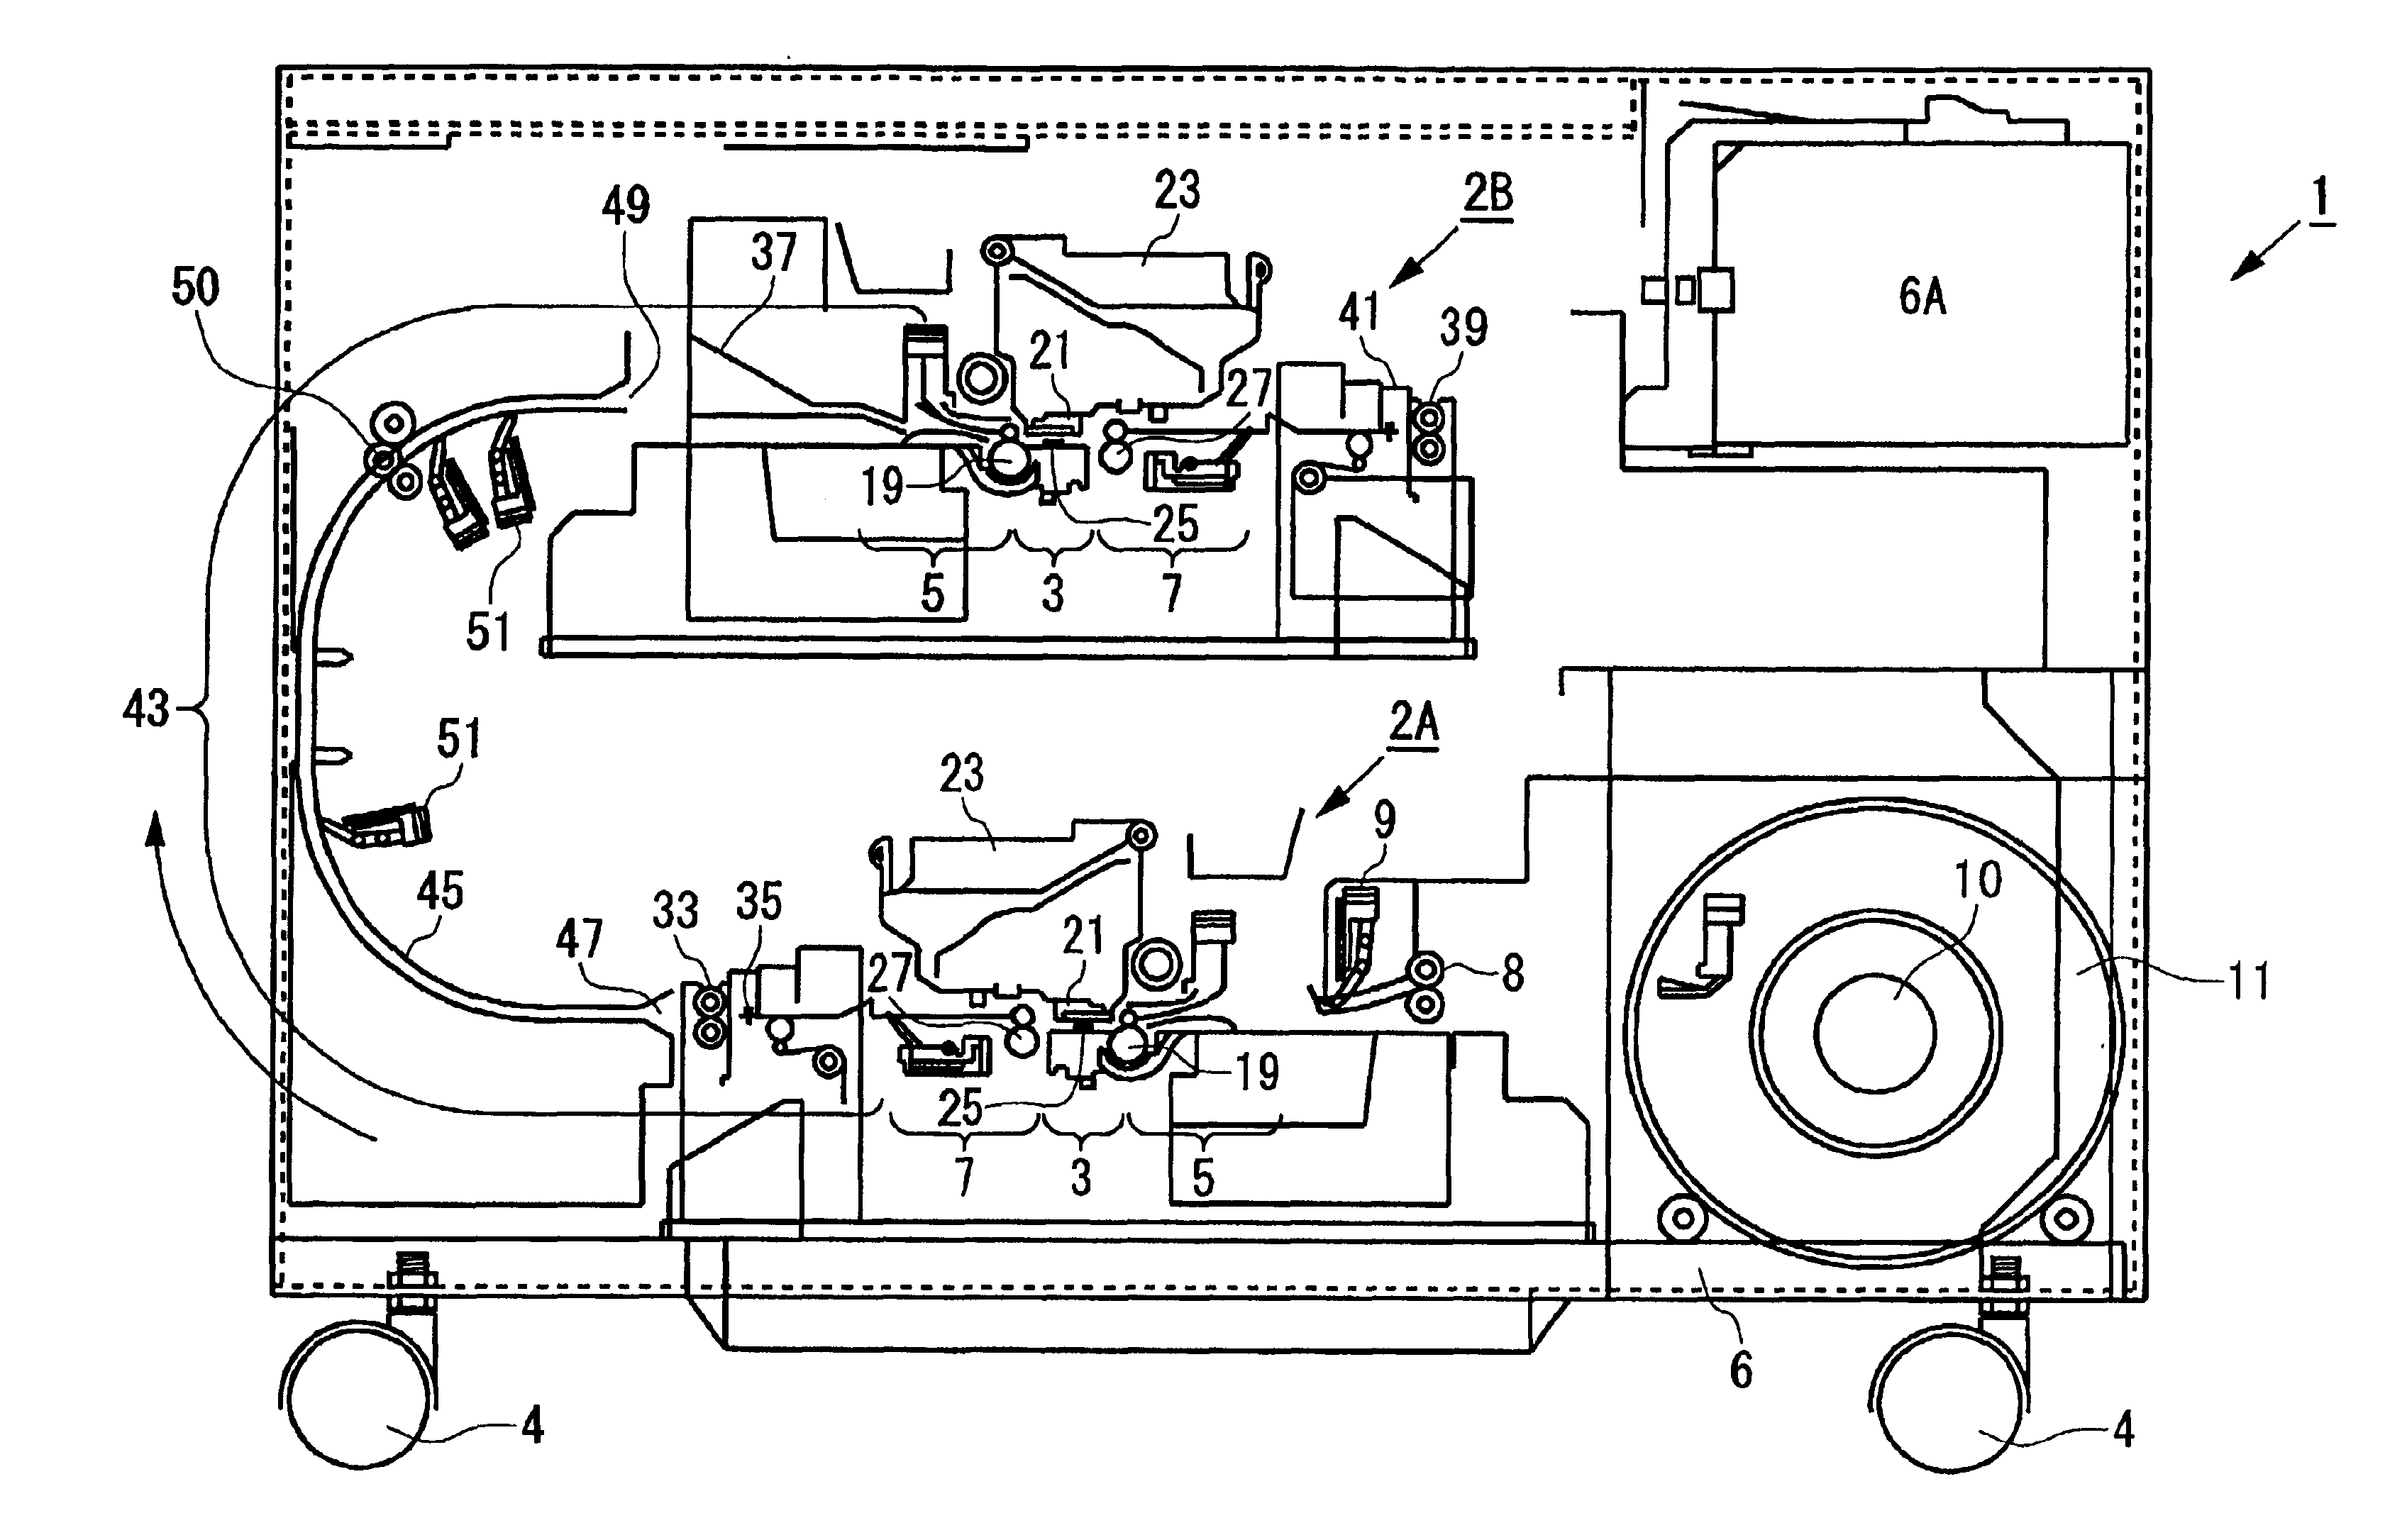 Double-sided printing apparatus